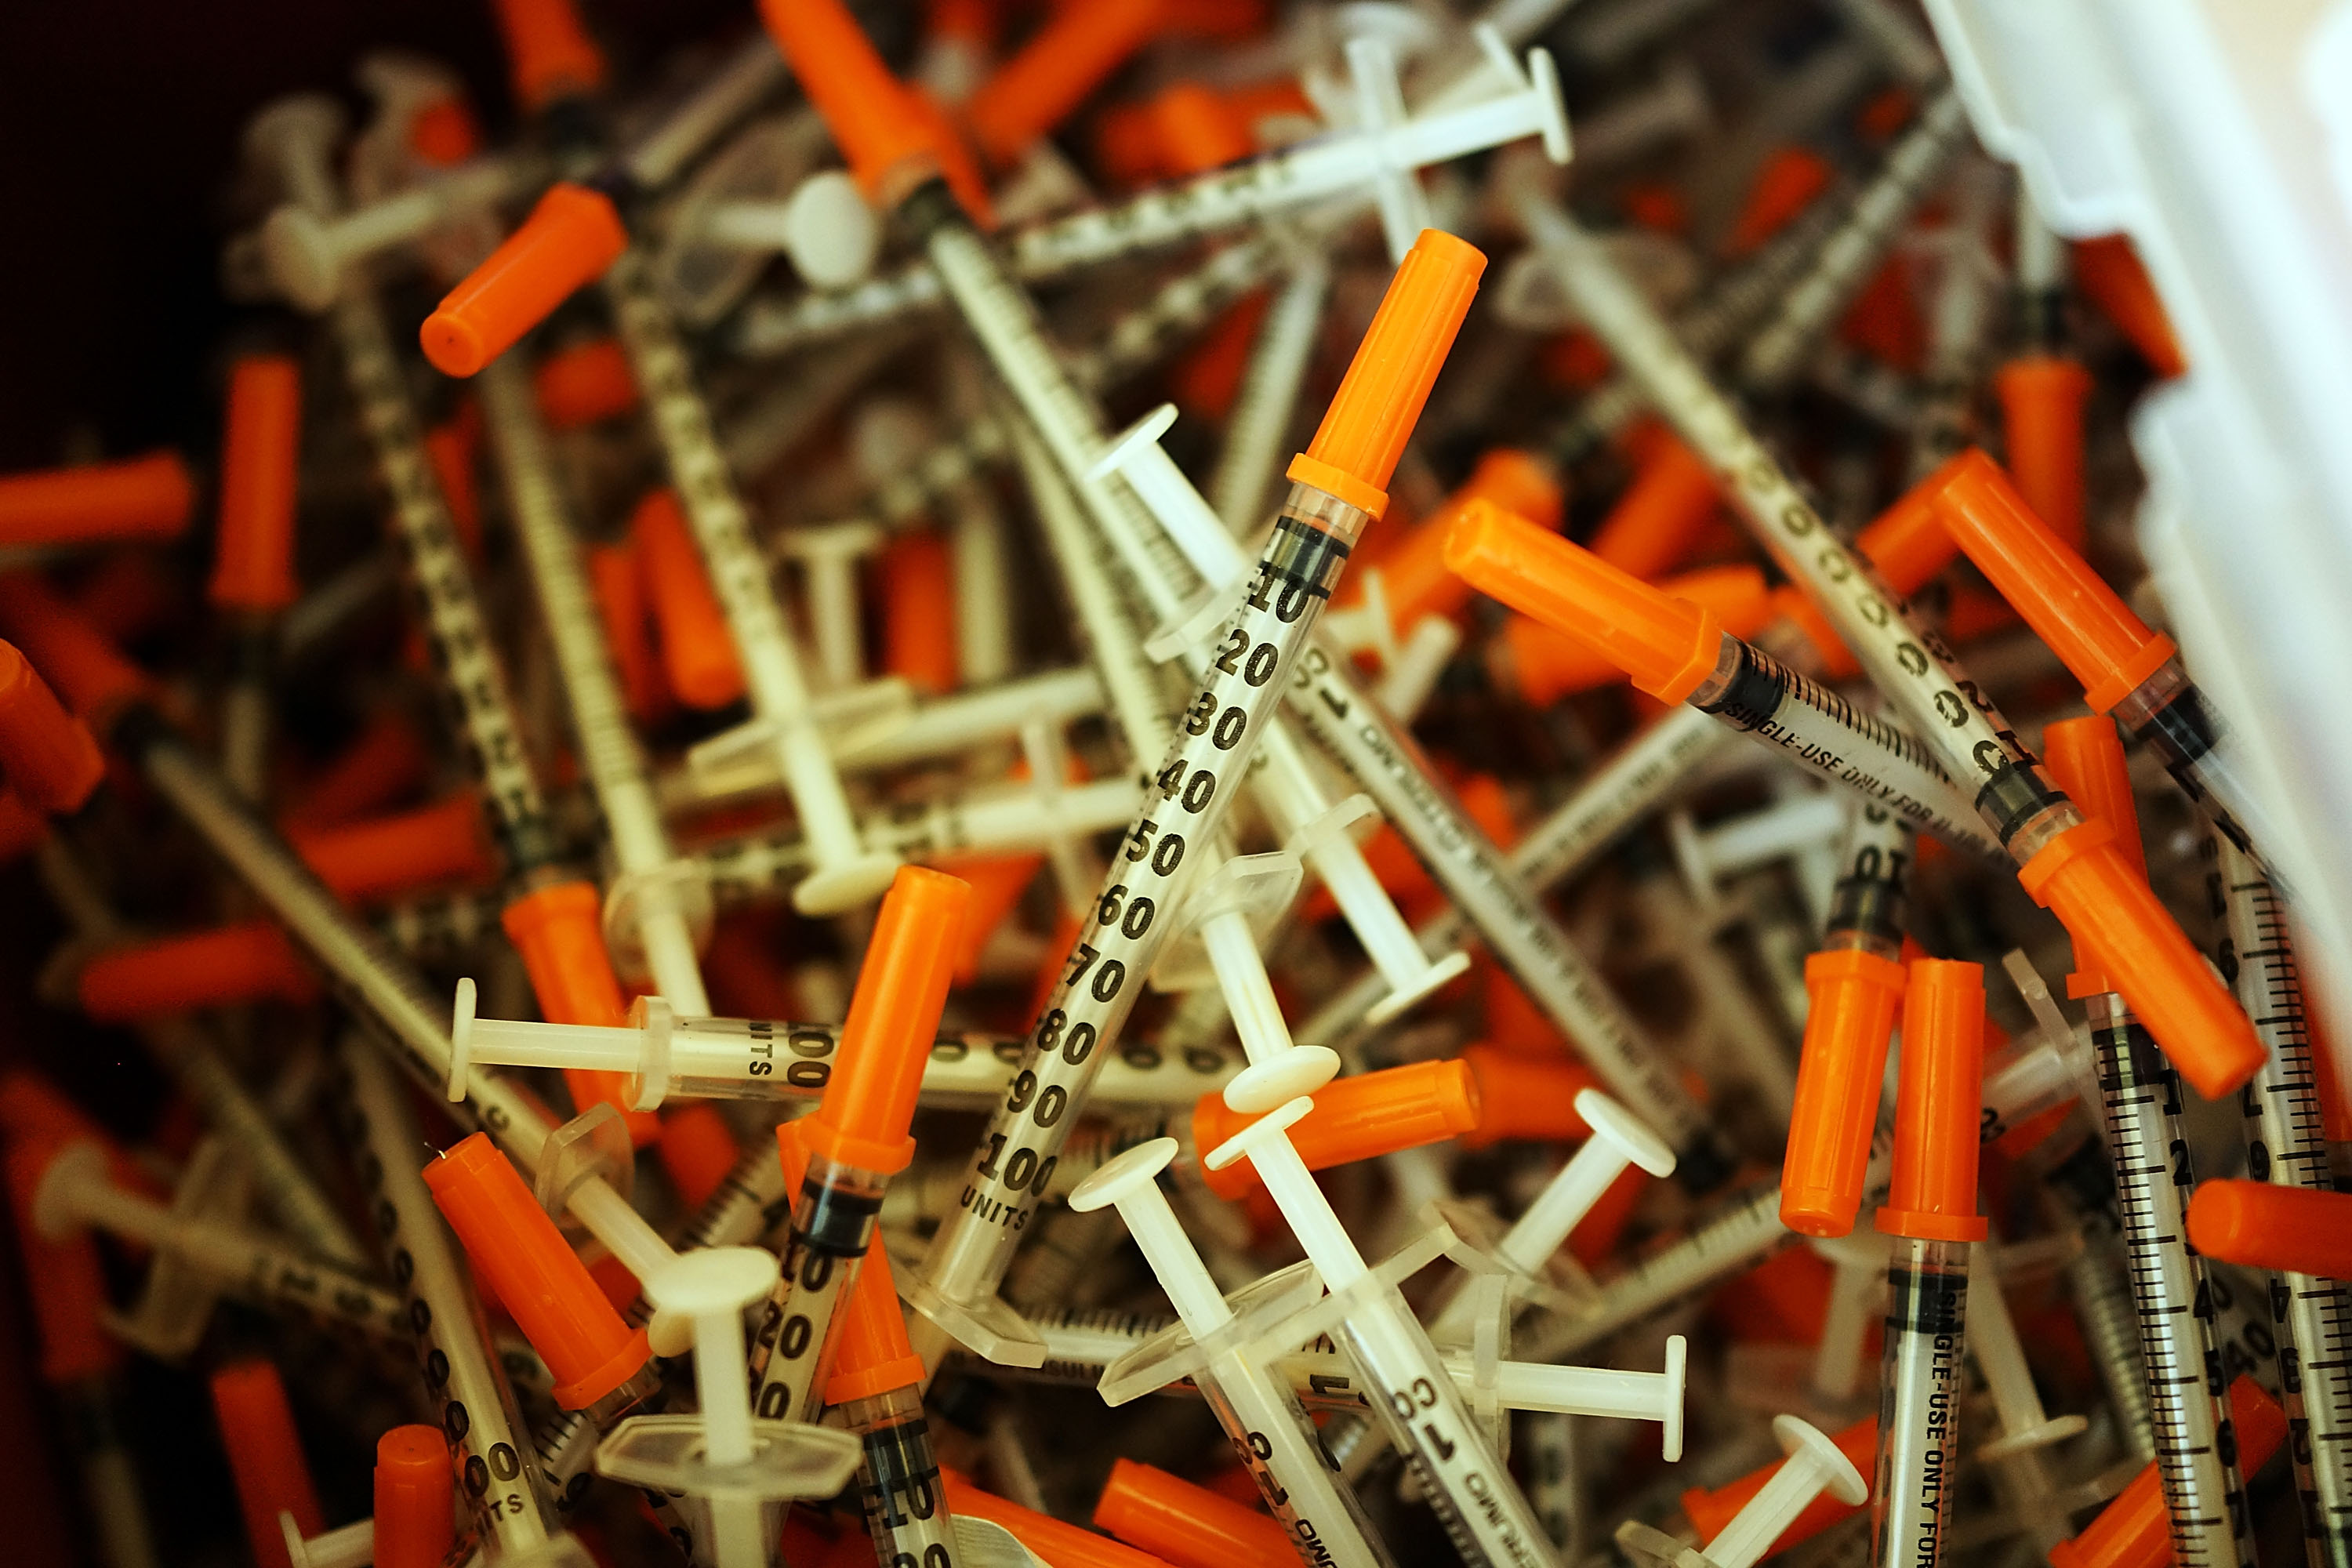 Used syringes are discarded at a needle exchange clinic in St. Johnsbury, Vermont. (Spencer Platt&mdash;Getty Images)